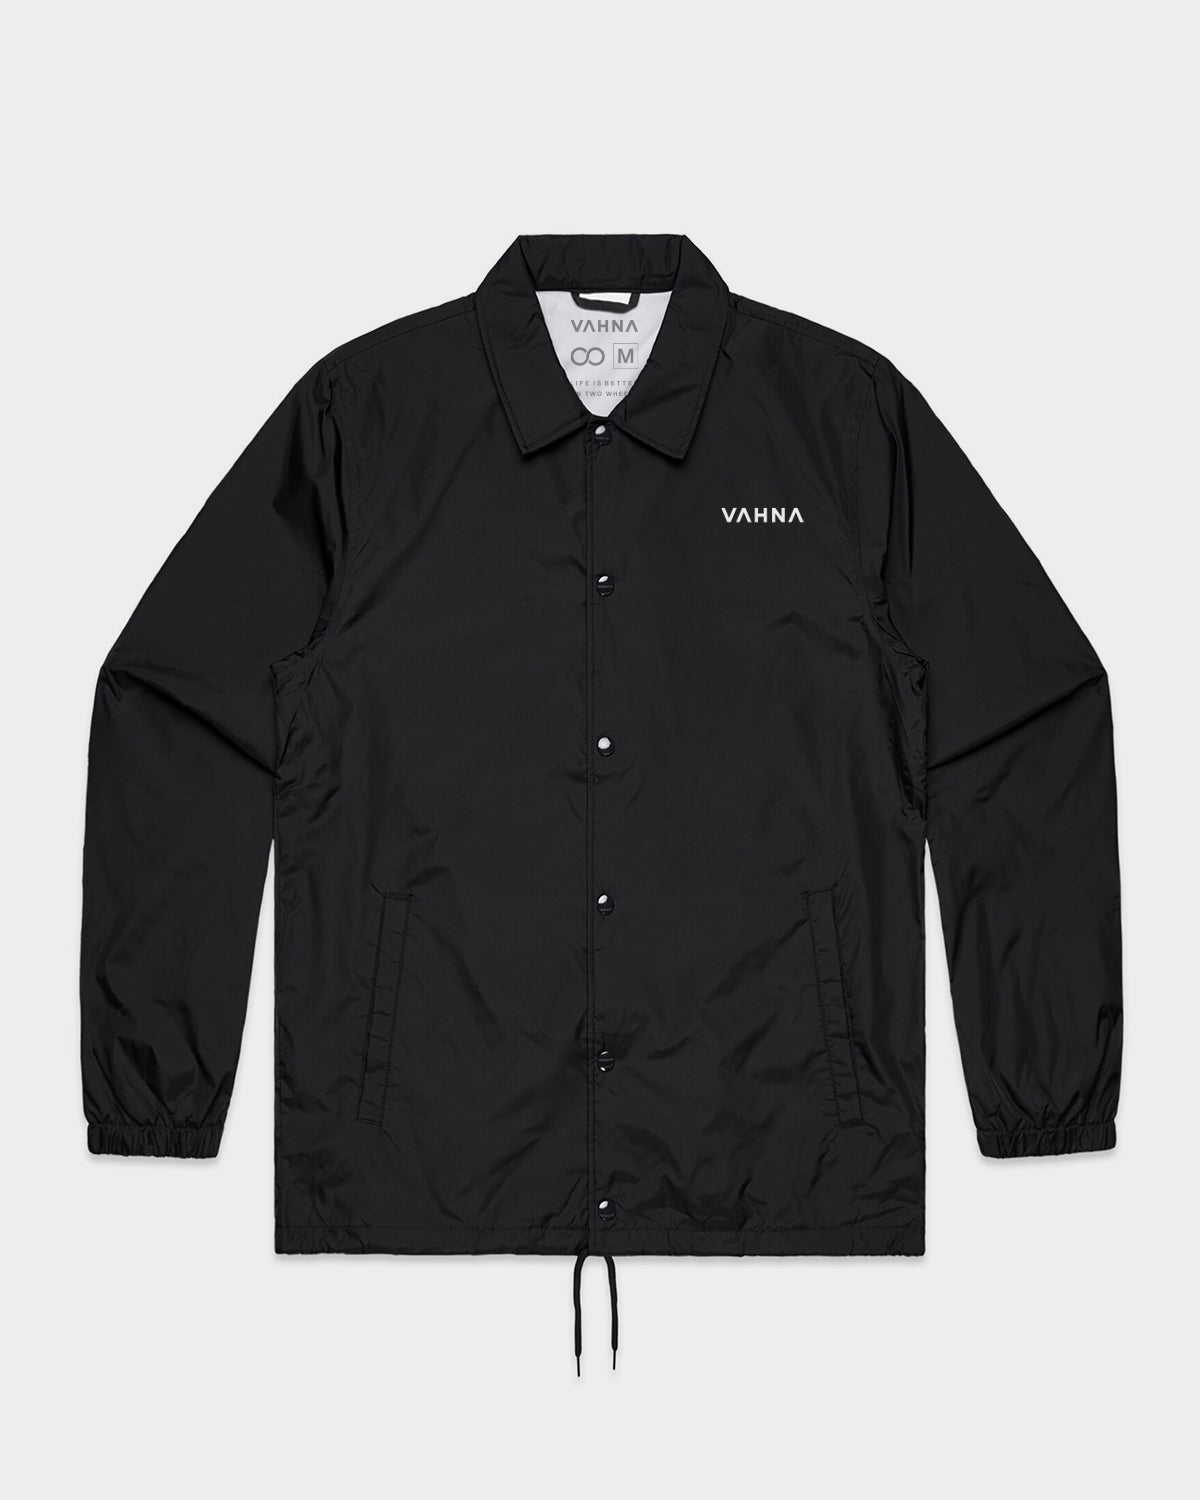 Members Only Coach Jacket